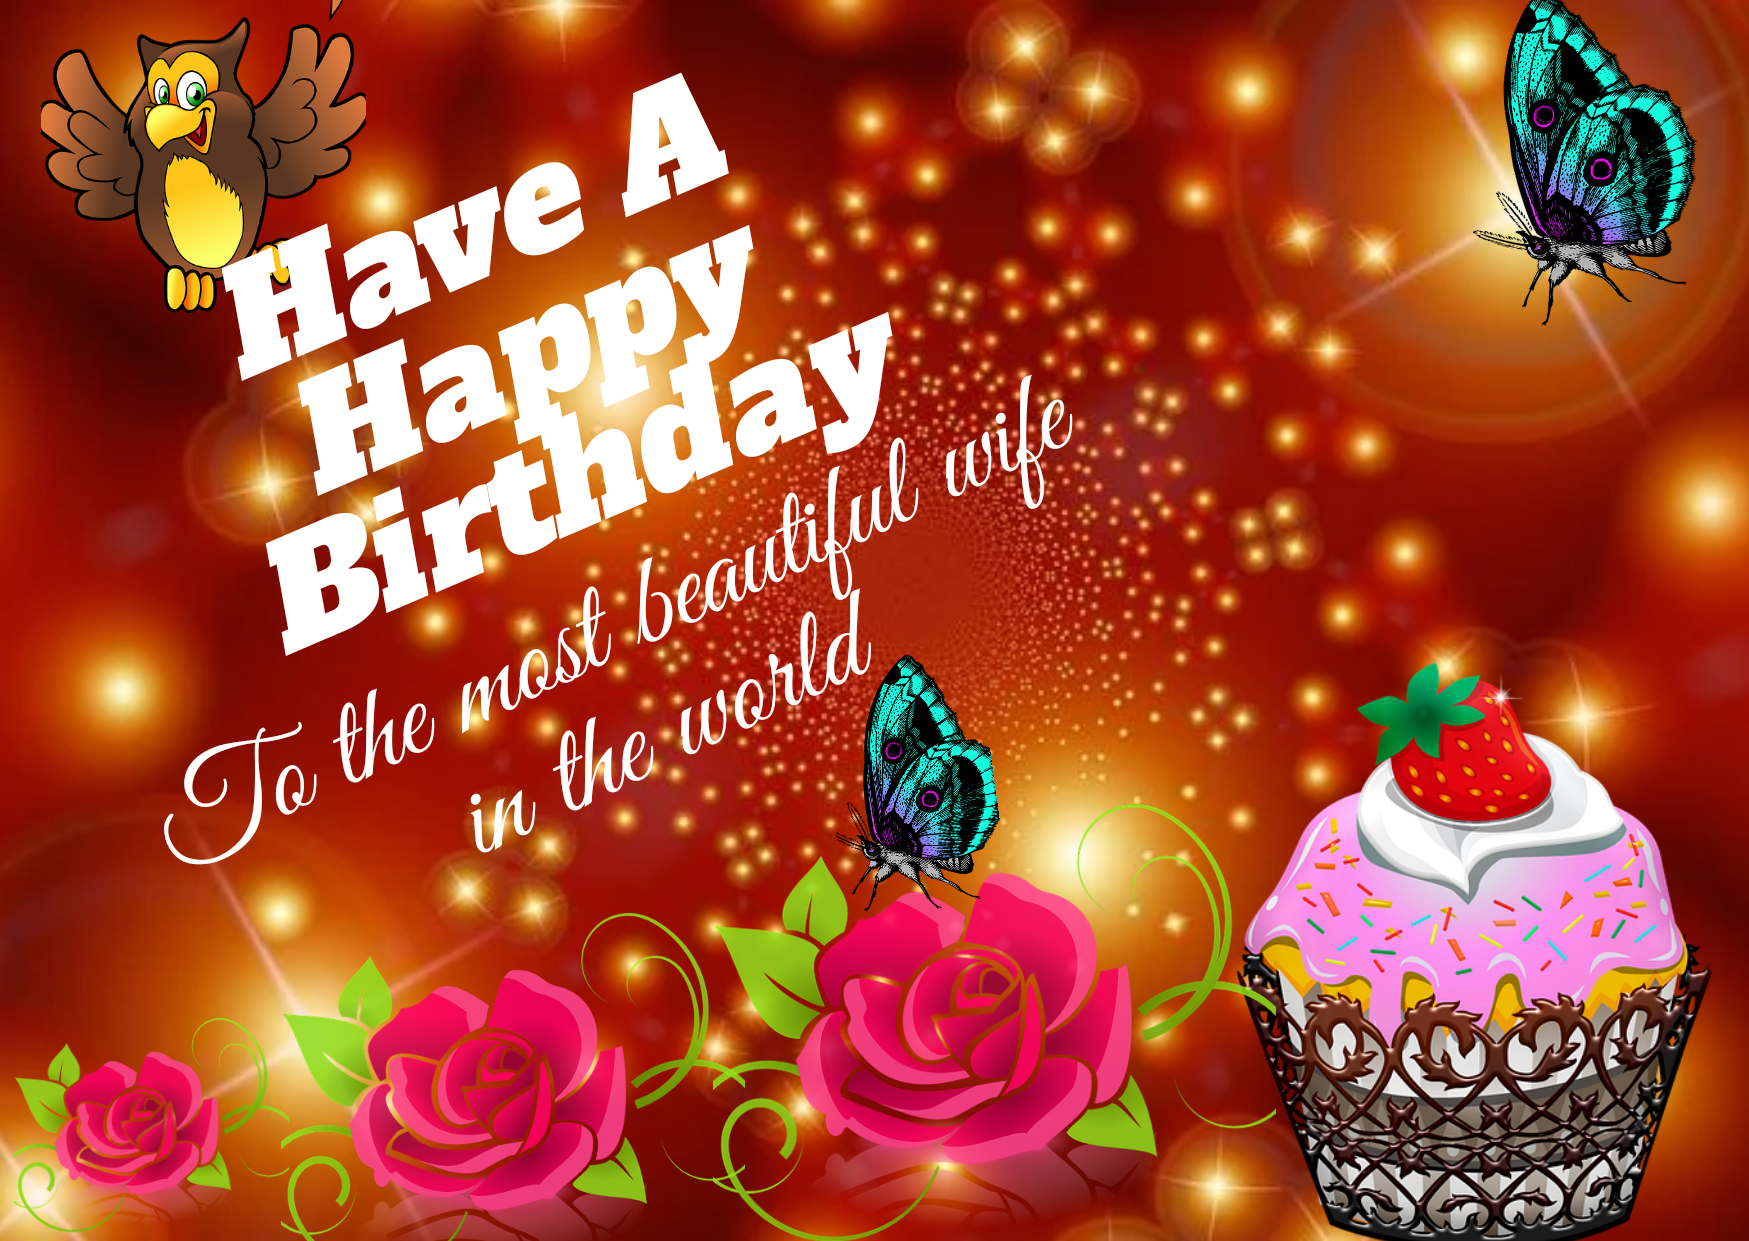 Best Beautiful Happy Birthday Wishes for wife In English, whatsaap birthday Wishes image for Wife free